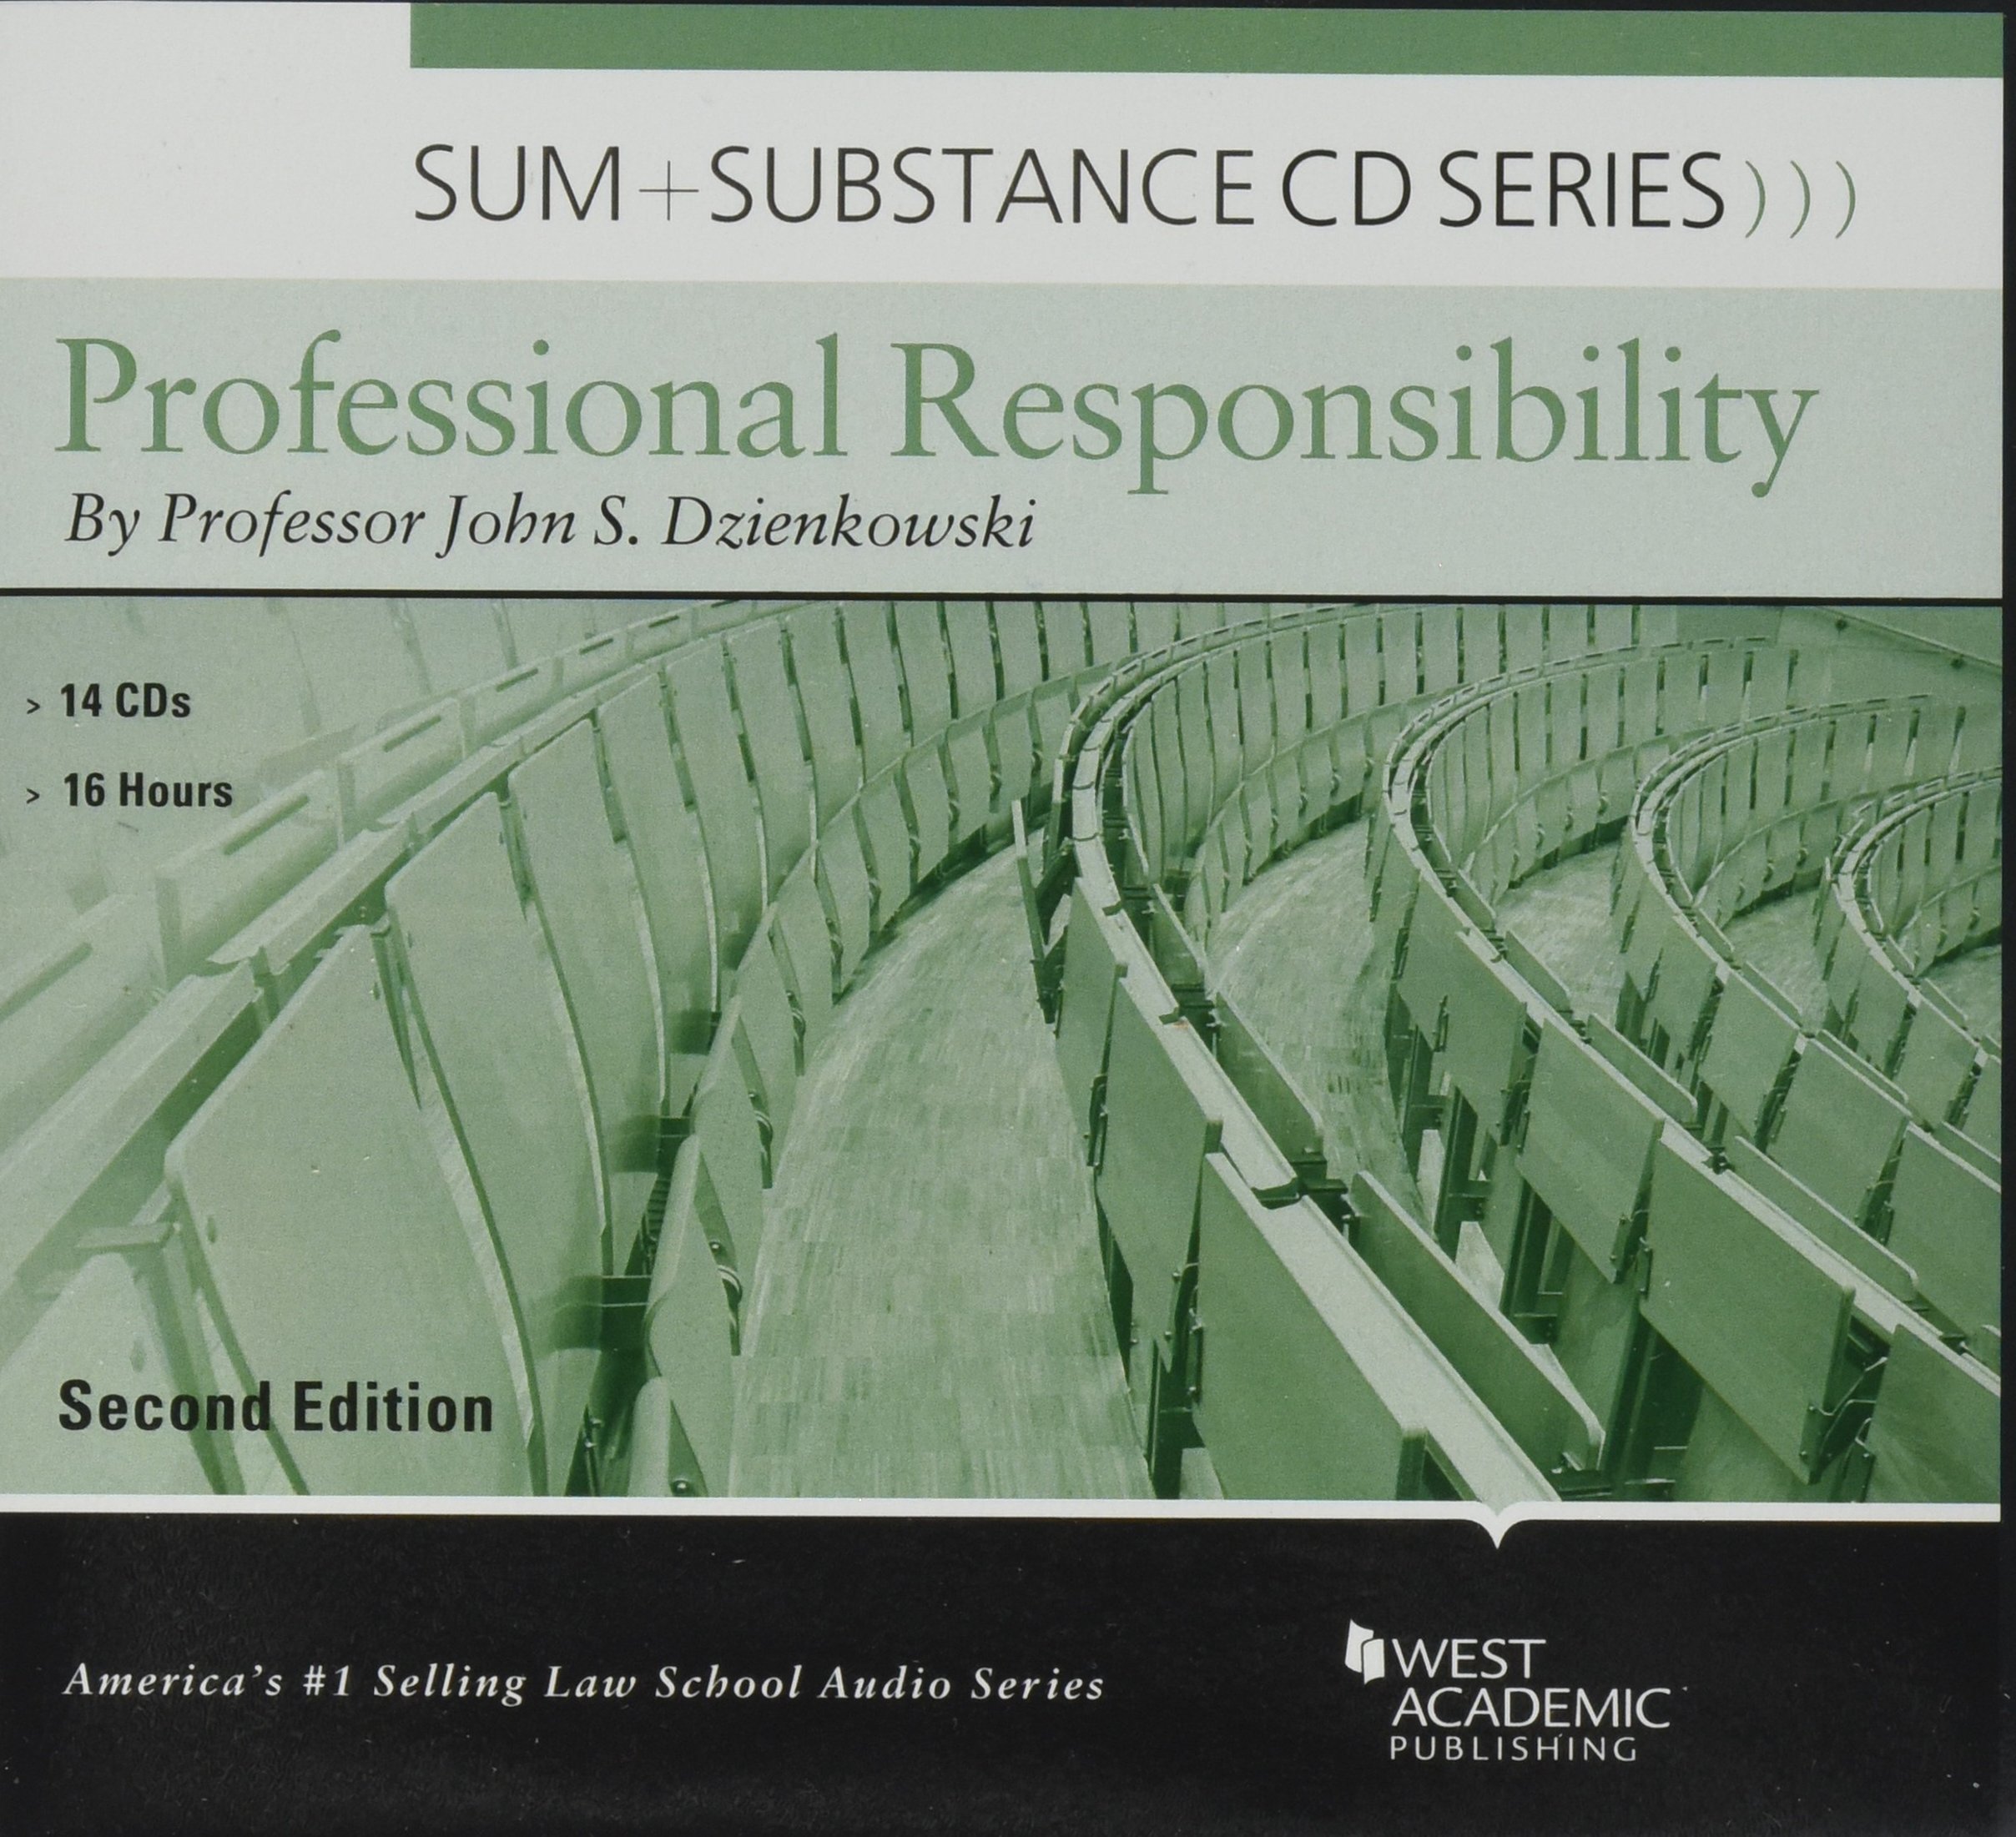 Sum and Substance Audio on Professional Responsibility